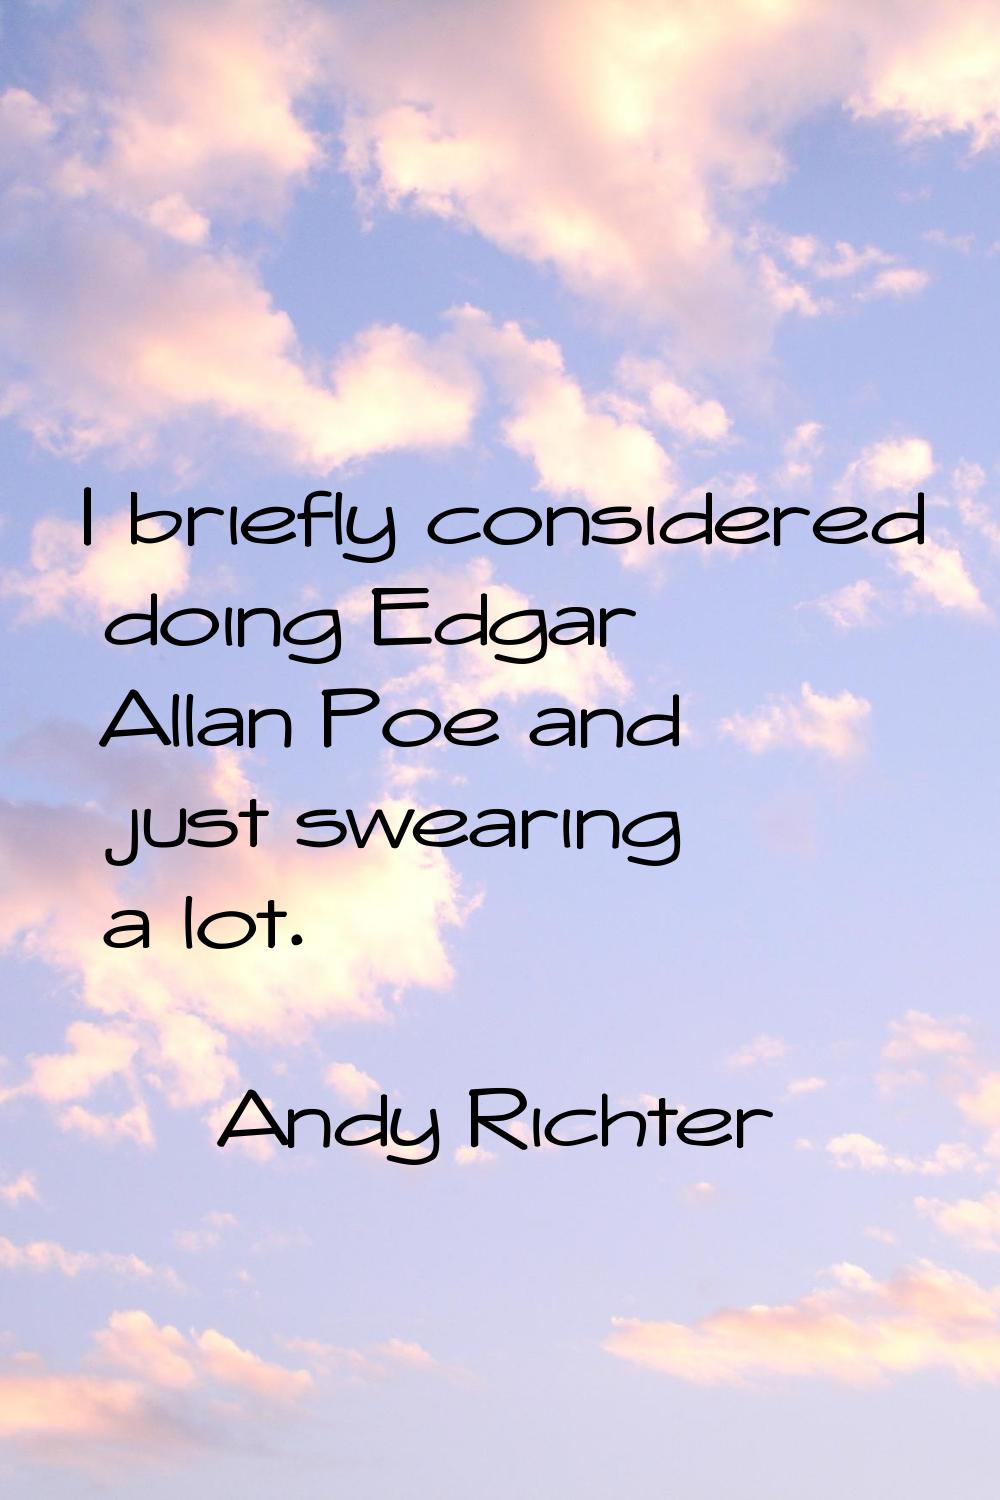 I briefly considered doing Edgar Allan Poe and just swearing a lot.